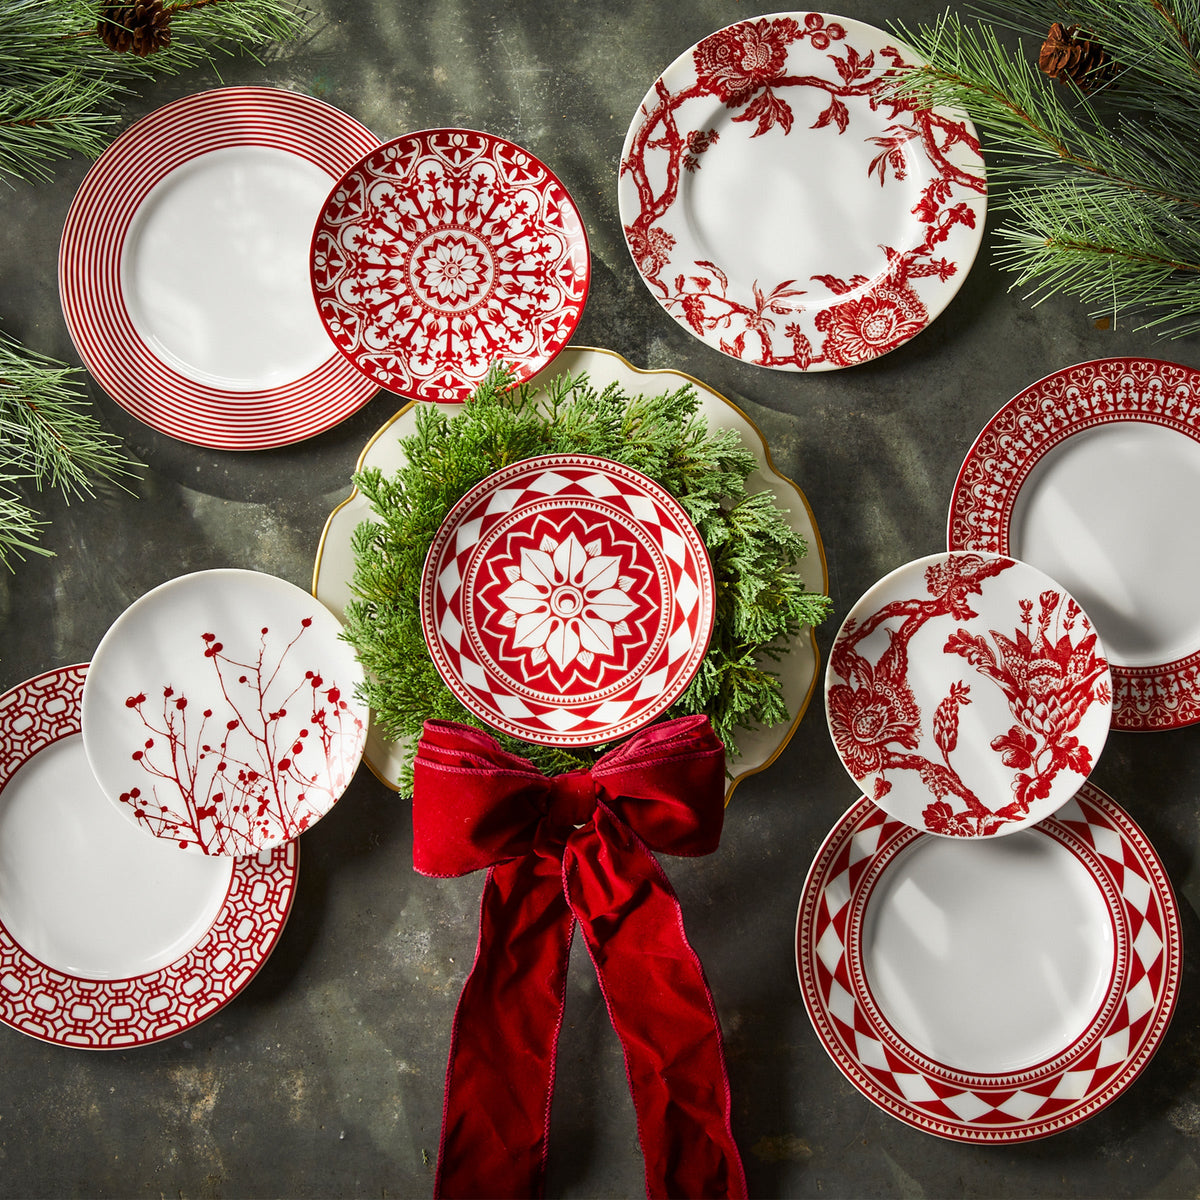 A variety of decorative red and white premium porcelain plates, including elegant **Newport Garden Gate Crimson Rimmed Salad Plates** by **Caskata Artisanal Home**, are arranged in a circular pattern, with a lush wreath featuring a red bow in the center and sprigs of pine framing the display from the corners.